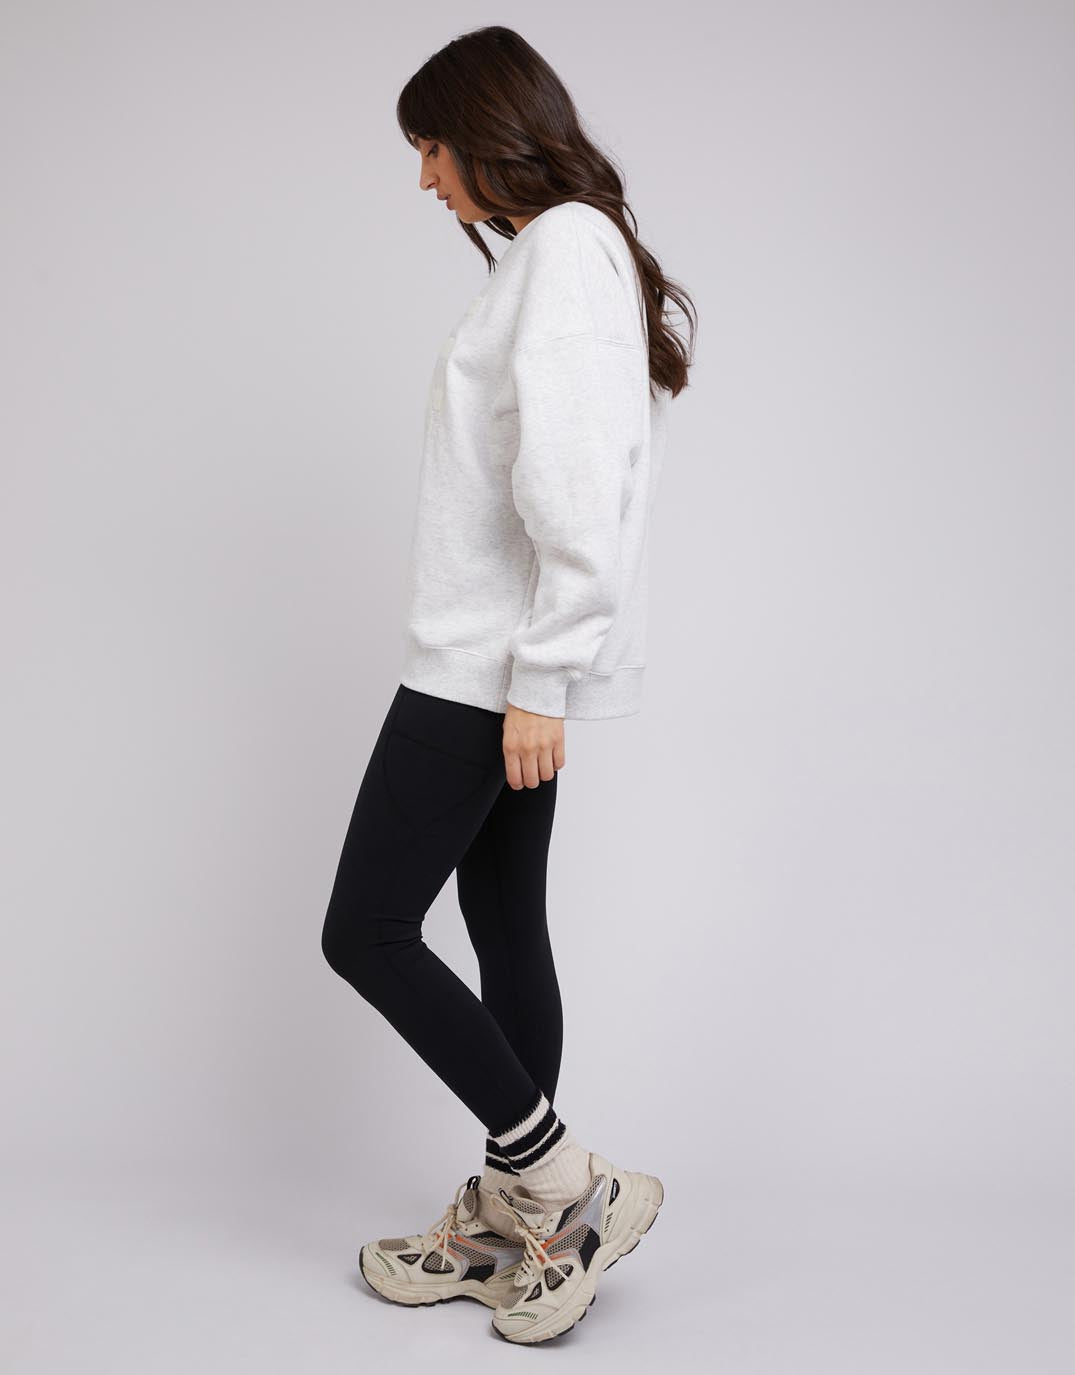 all-about-eve-base-active-crew-snow-womens-clothing